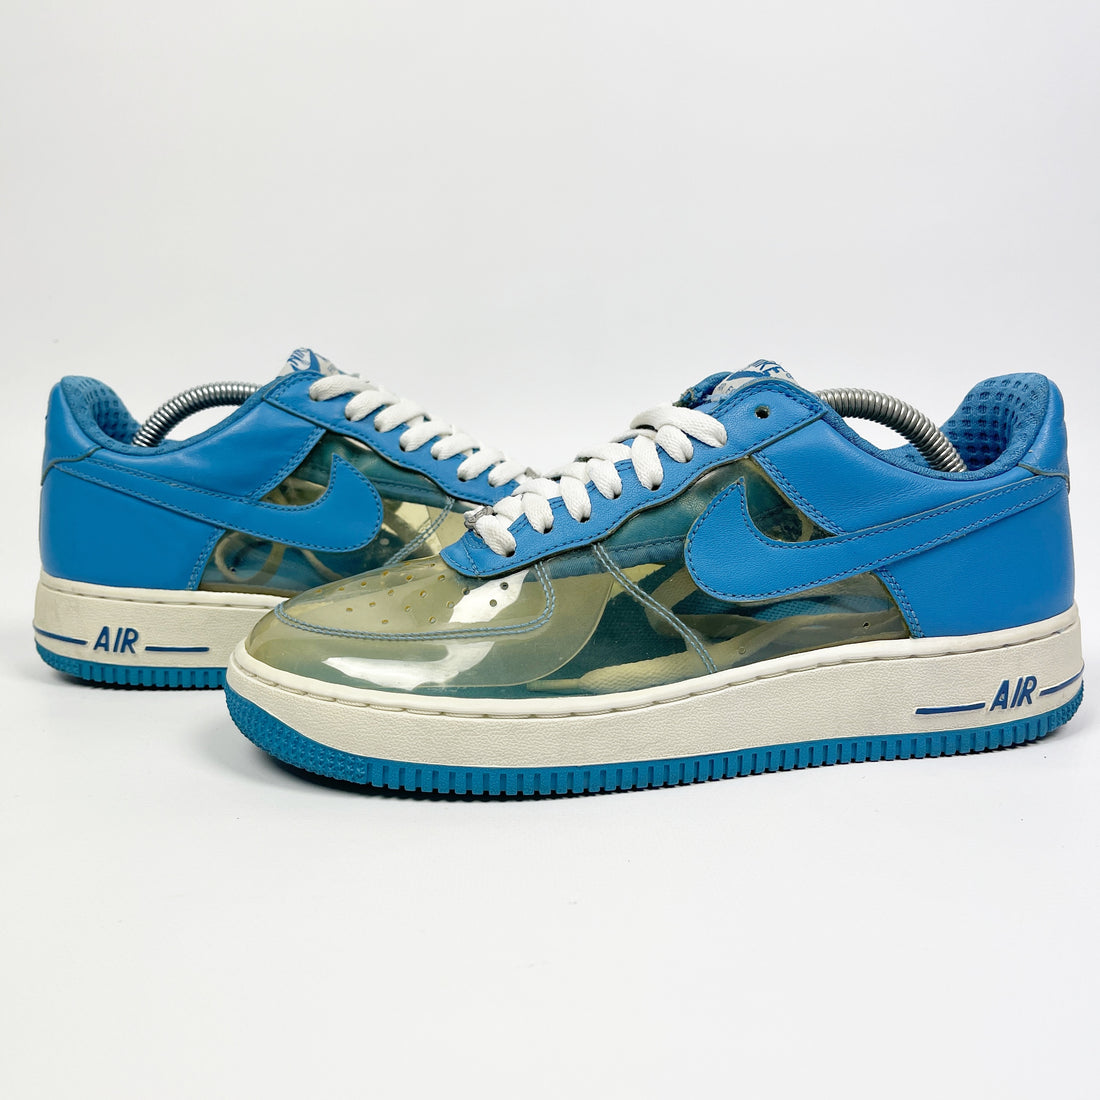 Nike Air Force 1 Low Fantastic 4 Invisible Woman 2006 - Vintagetts